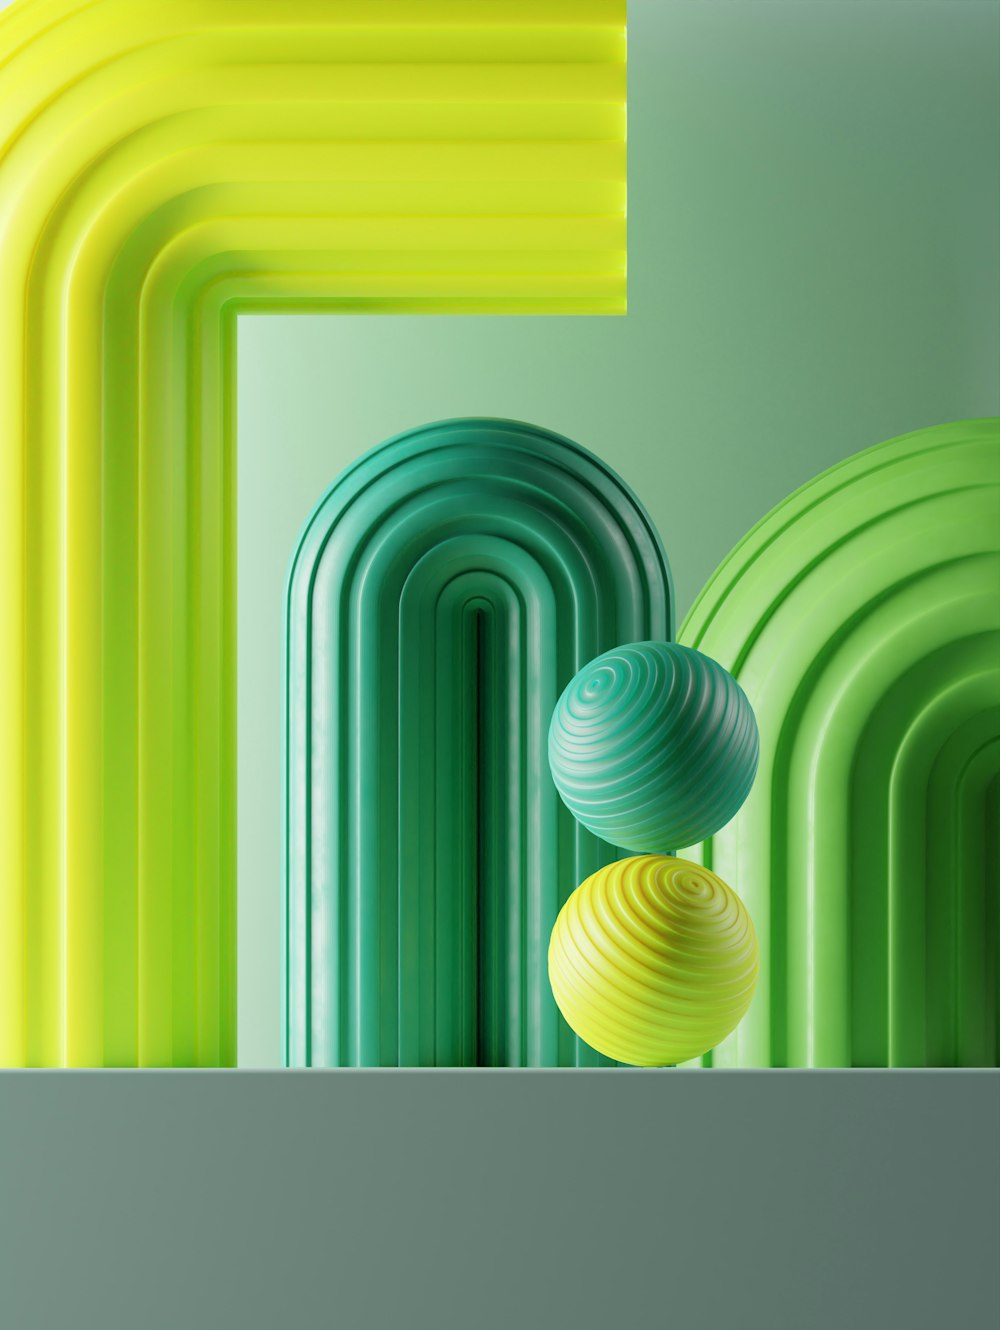 a group of green and yellow objects in a room